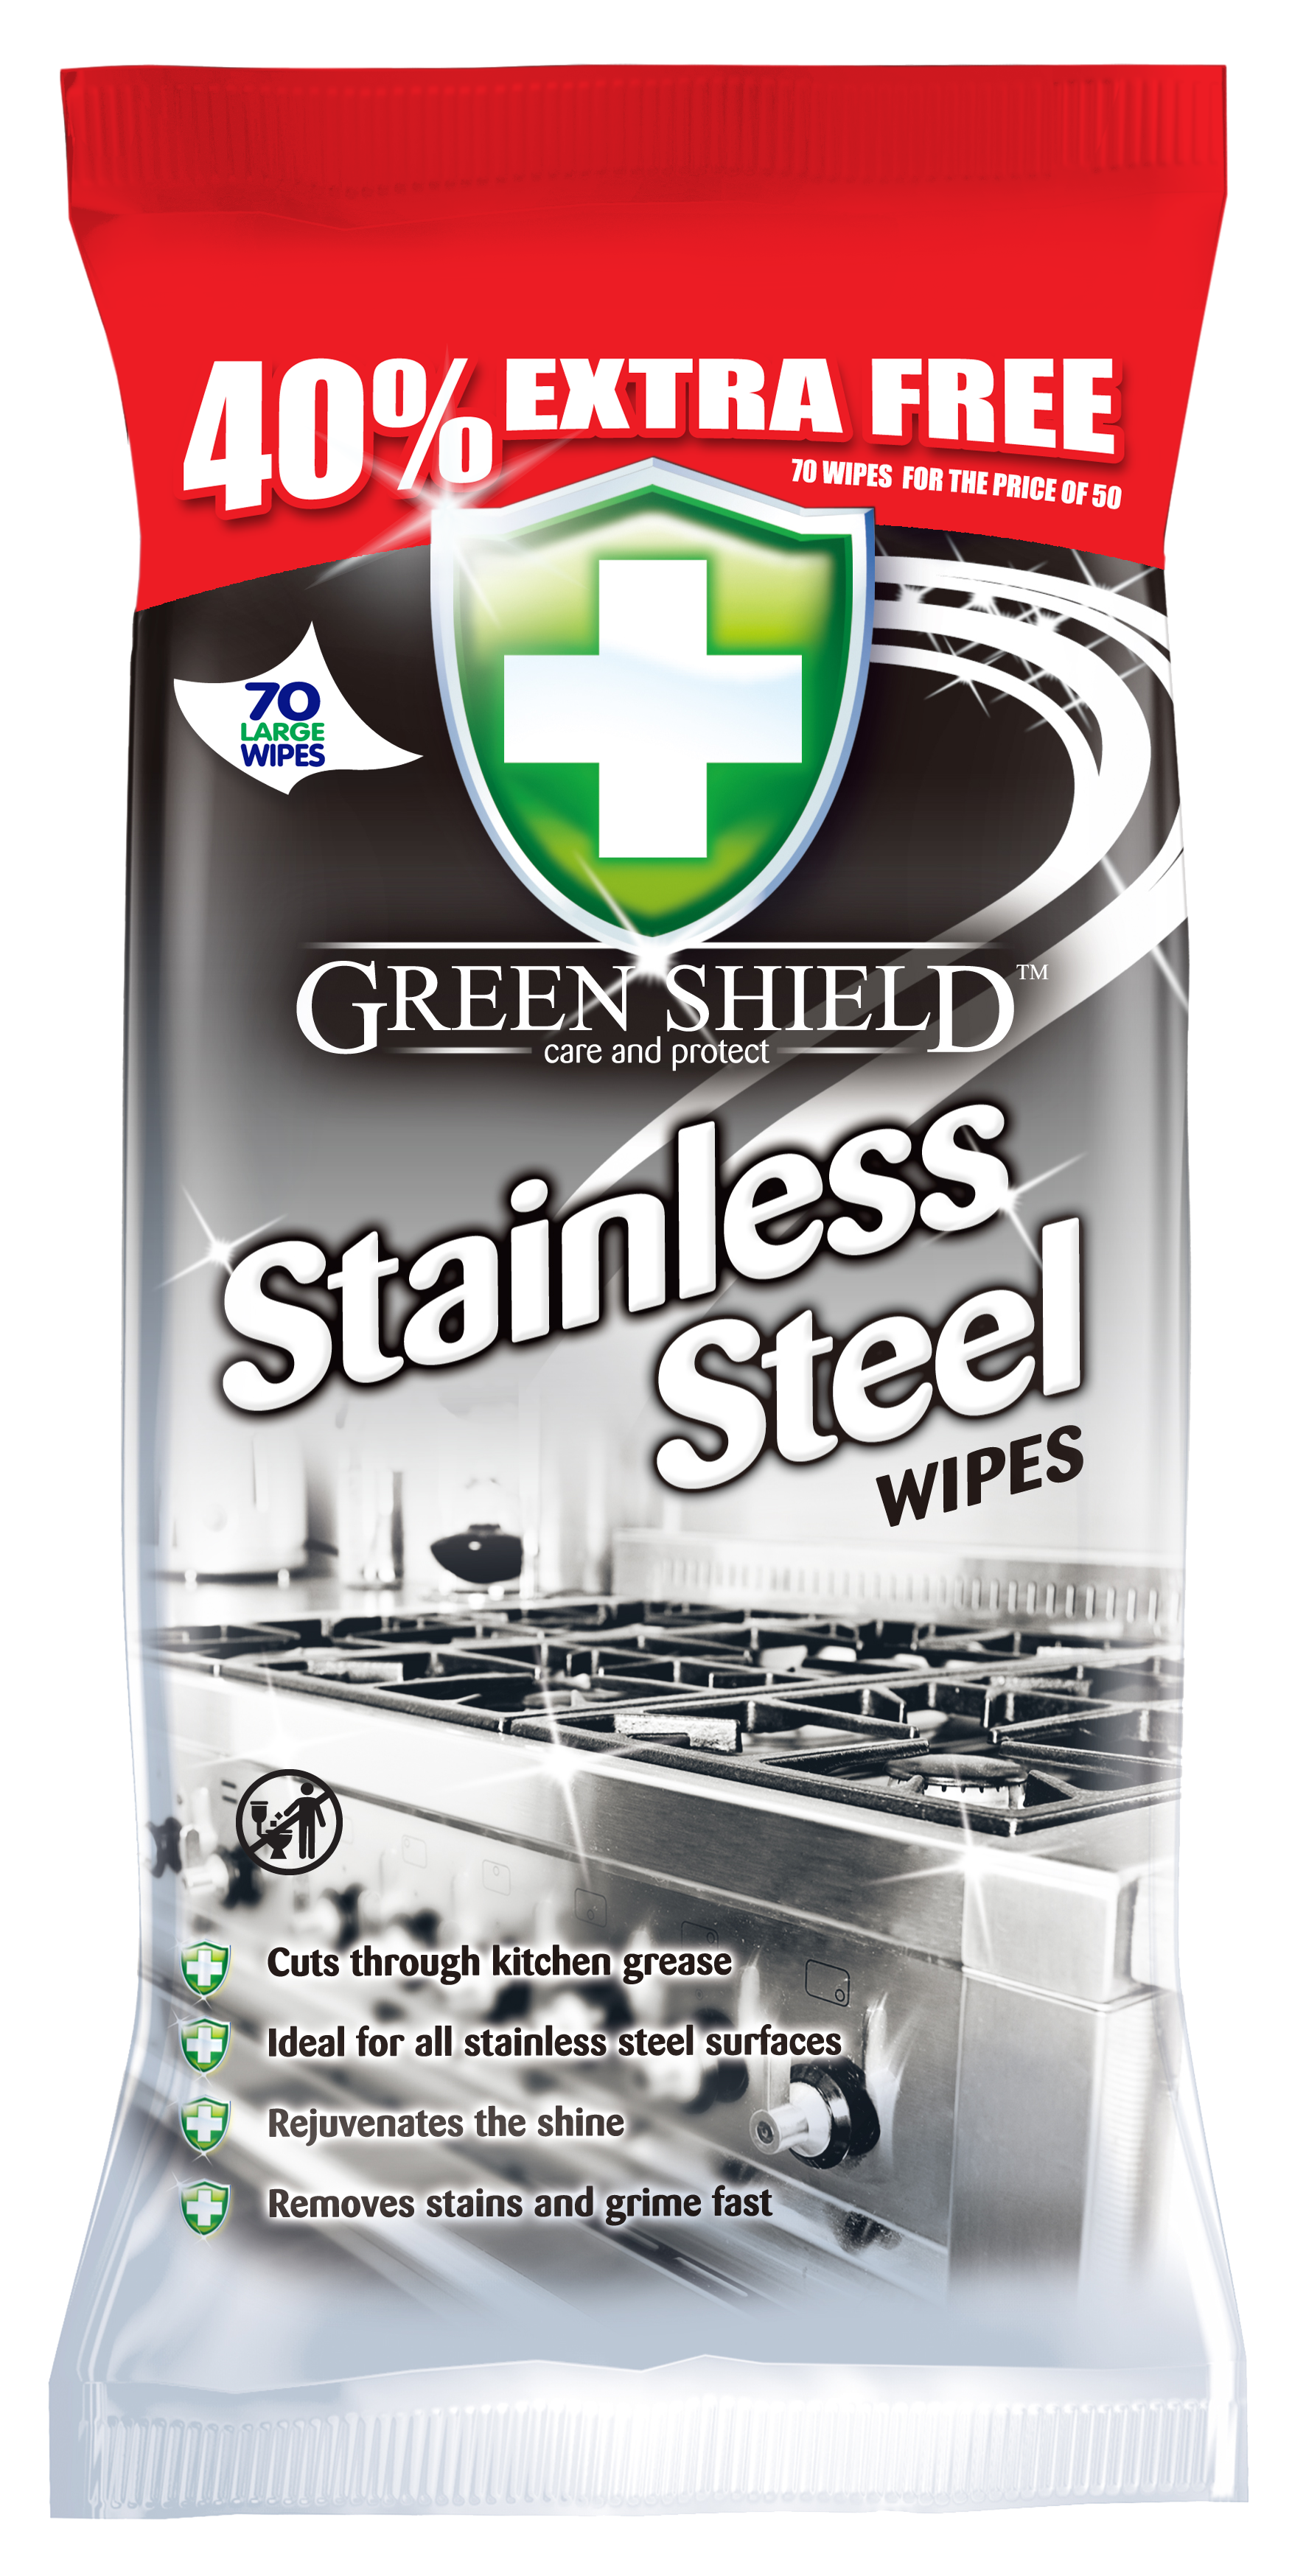 Greenshield Stainless Steel Wipes 70s